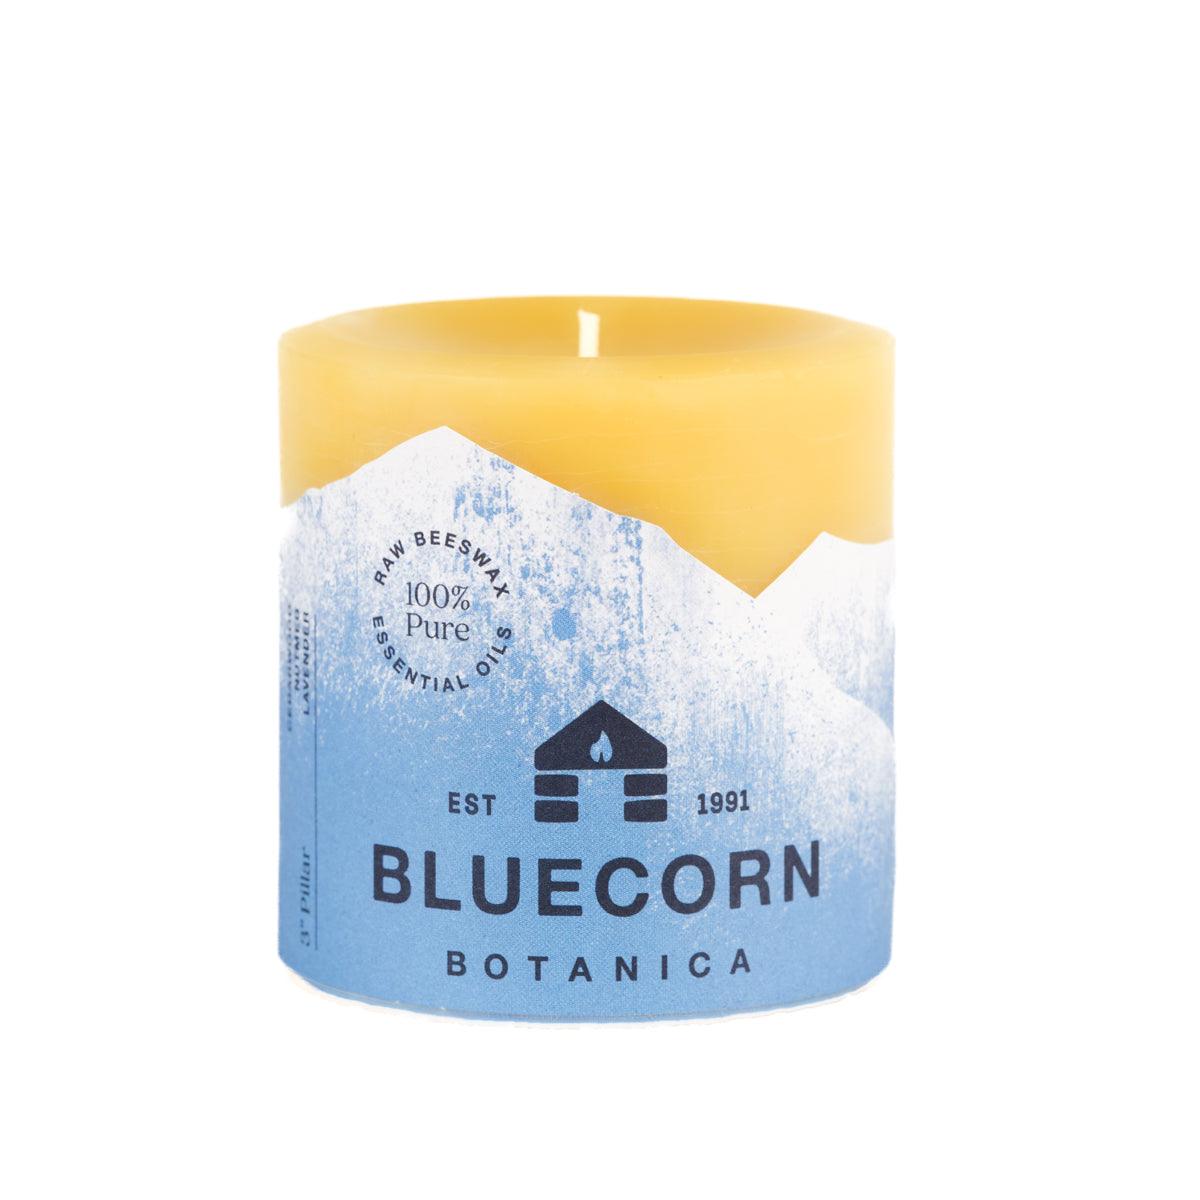 Bluecorn Botanica 100% Pure Beeswax Cedarwood, Nutmeg and Lavender  3" x 3" Scented Pillar Candle. Burn Time: 50 hours. Made with 100% Pure Beeswax, 100% Pure Essential Oils, and a 100% pure cotton wick, no lead. Candles are paraffin free, clean burning and non-toxic. Features Bluecorn Botanica label in Blue printed on 100% recycled paper. Wax is golden in color. 